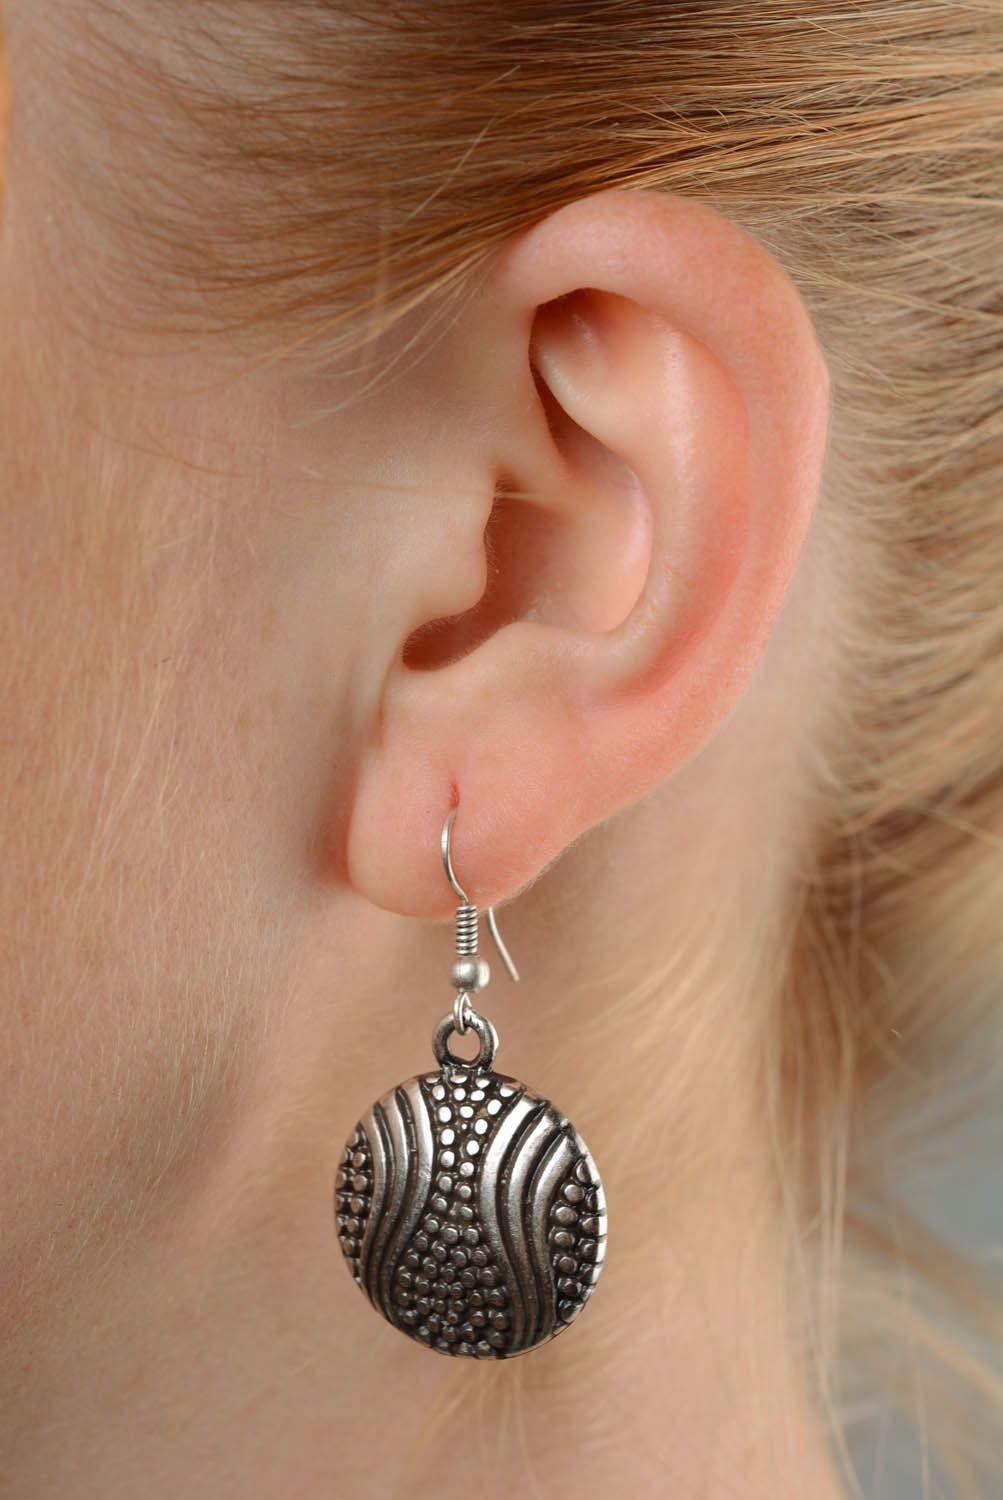 Round pendant earrings made ​​of metal photo 3